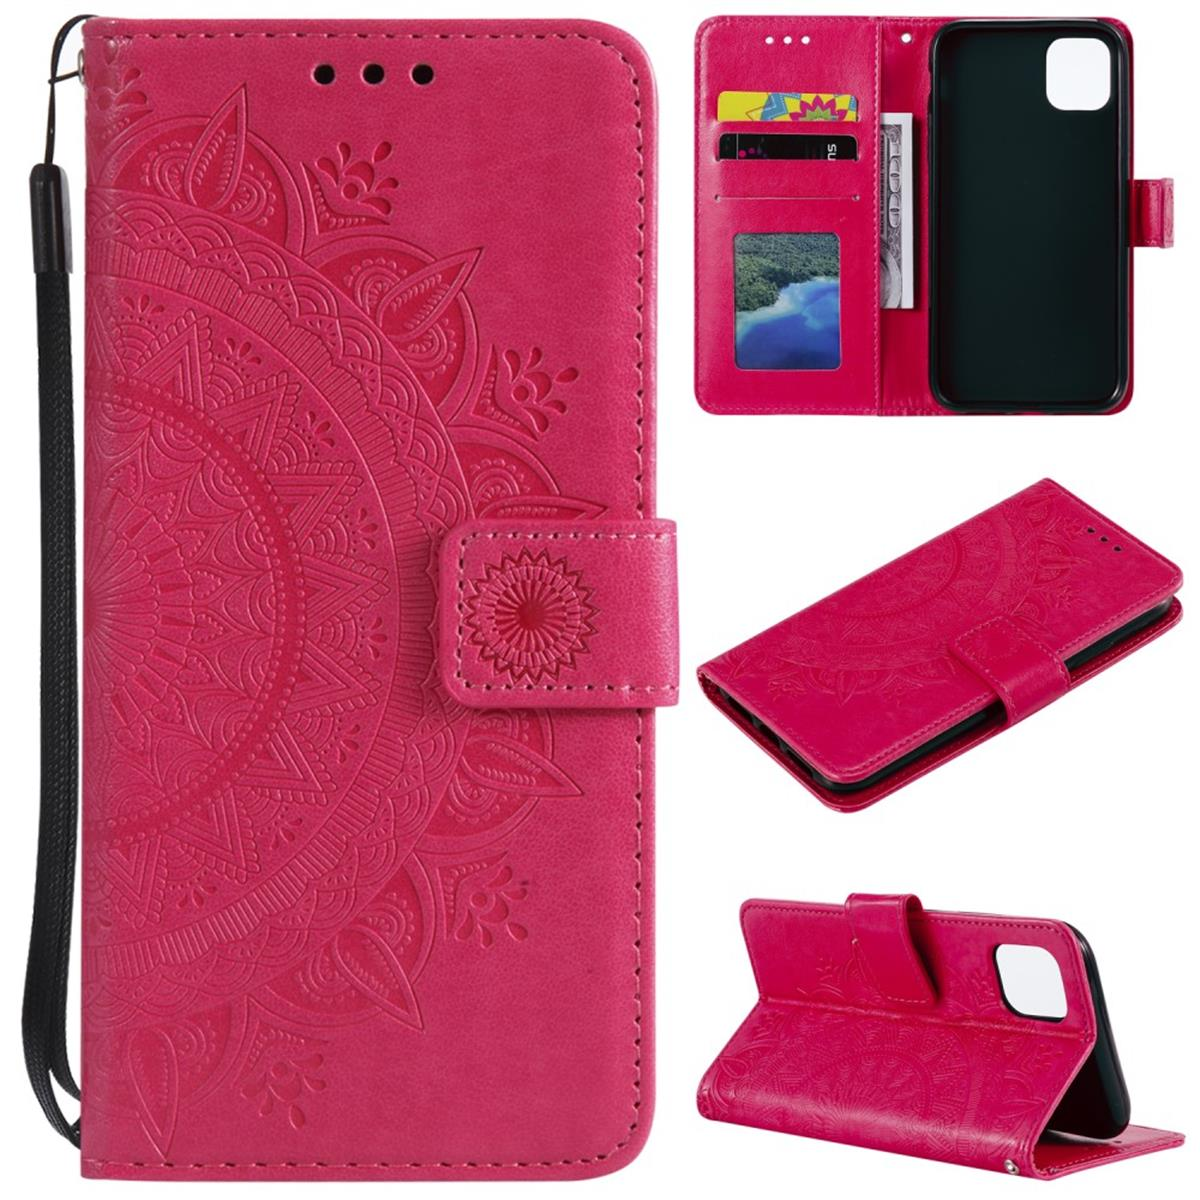 COVERKINGZ Klapphülle mit iPhone Pro, Muster, 13 Pink Bookcover, Mandala Apple